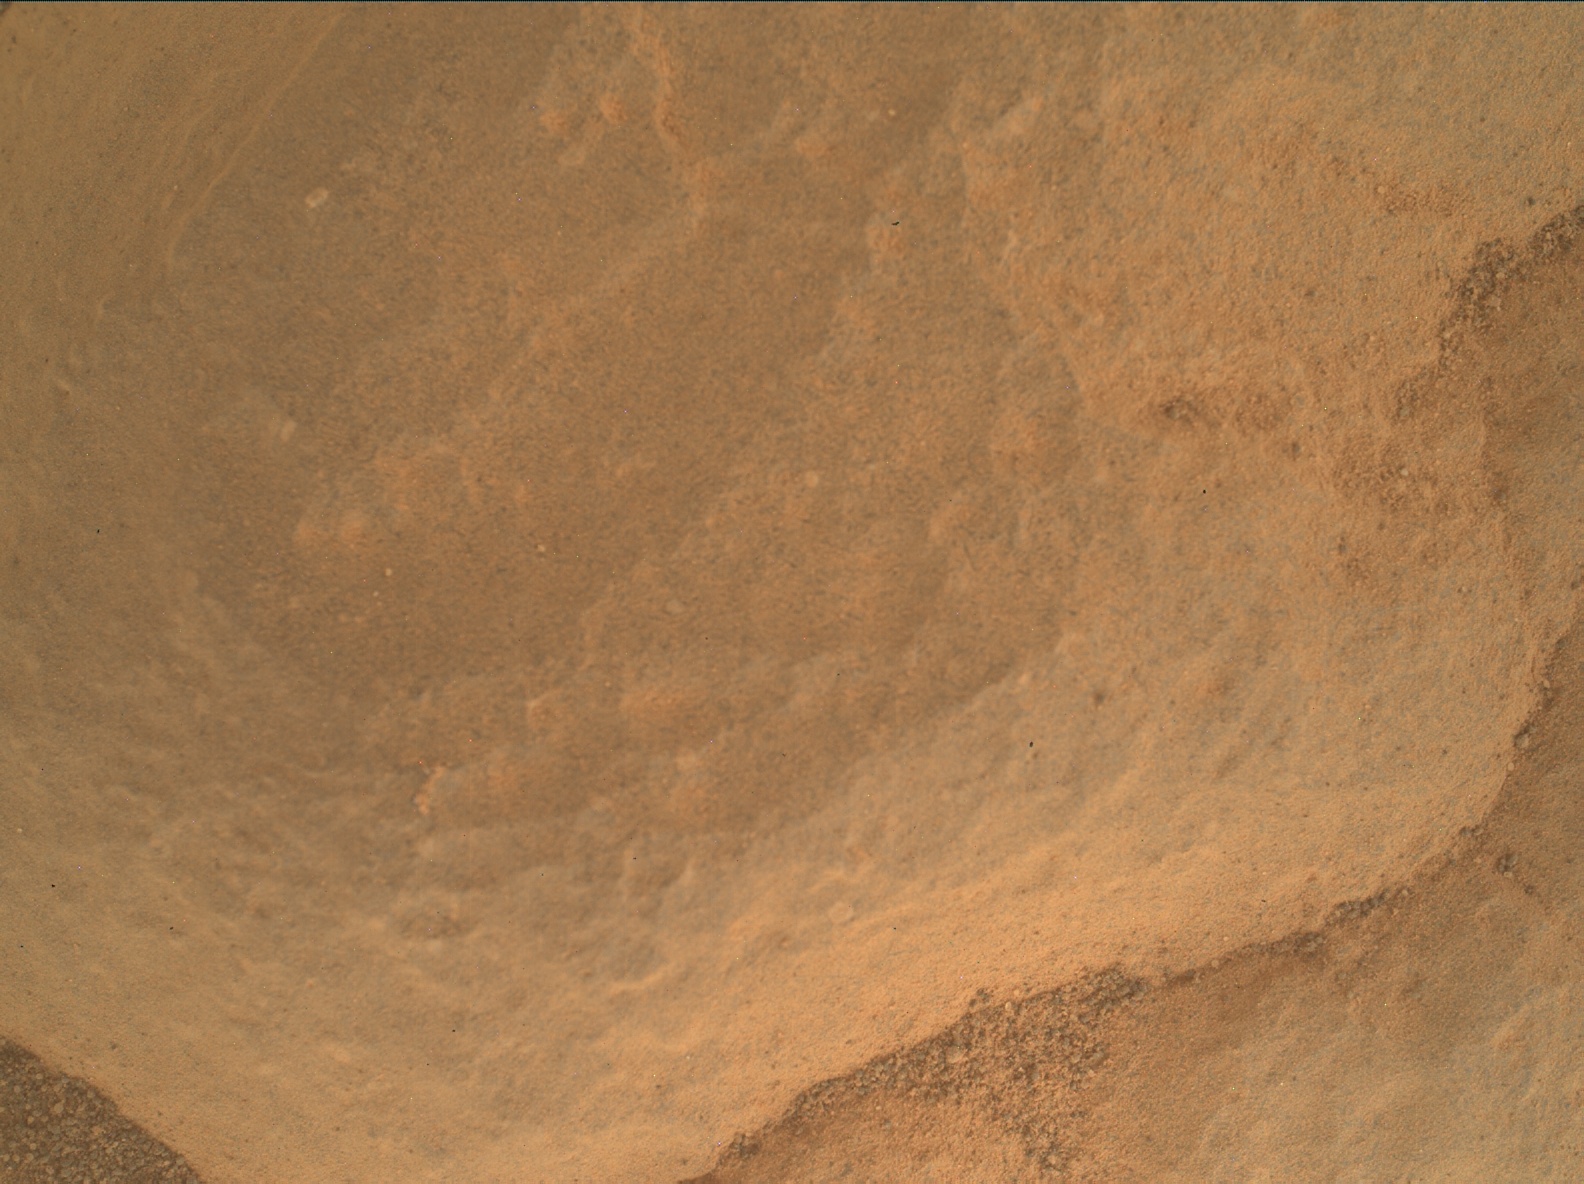 Nasa's Mars rover Curiosity acquired this image using its Mars Hand Lens Imager (MAHLI) on Sol 3415